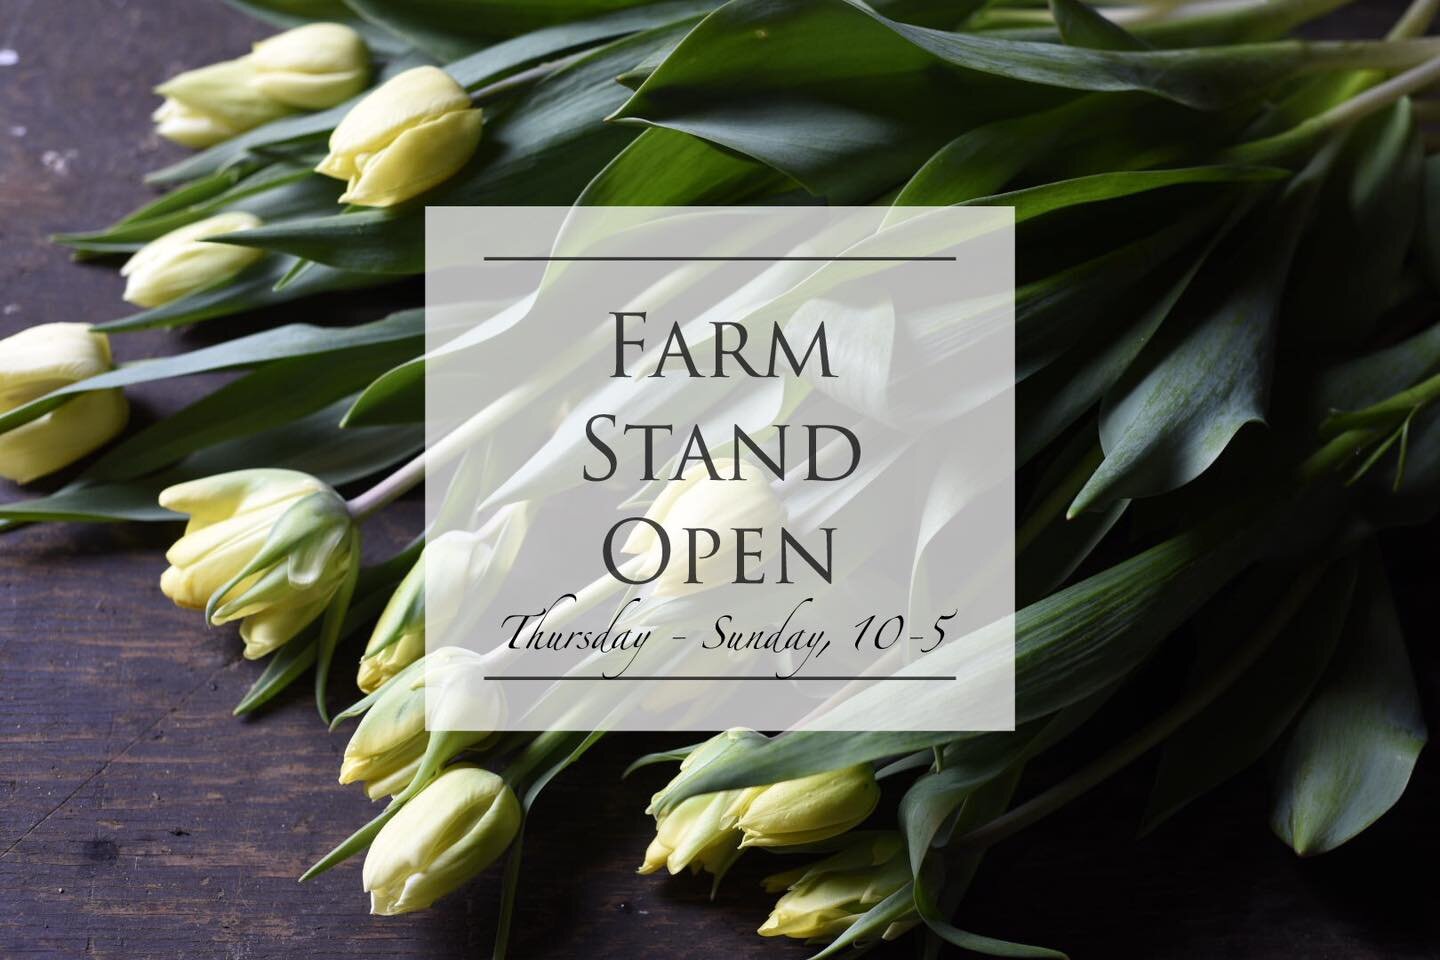 Our farmstand hours are changing. Open four days a week starting Thursday. 

Thursday - Sunday, 10am-5pm. 

Cash or e-transfer. Instructions are posted in the stand. Please help yourself, thank you.

This week&rsquo;s lineup :
Tulip bunches (lots of 